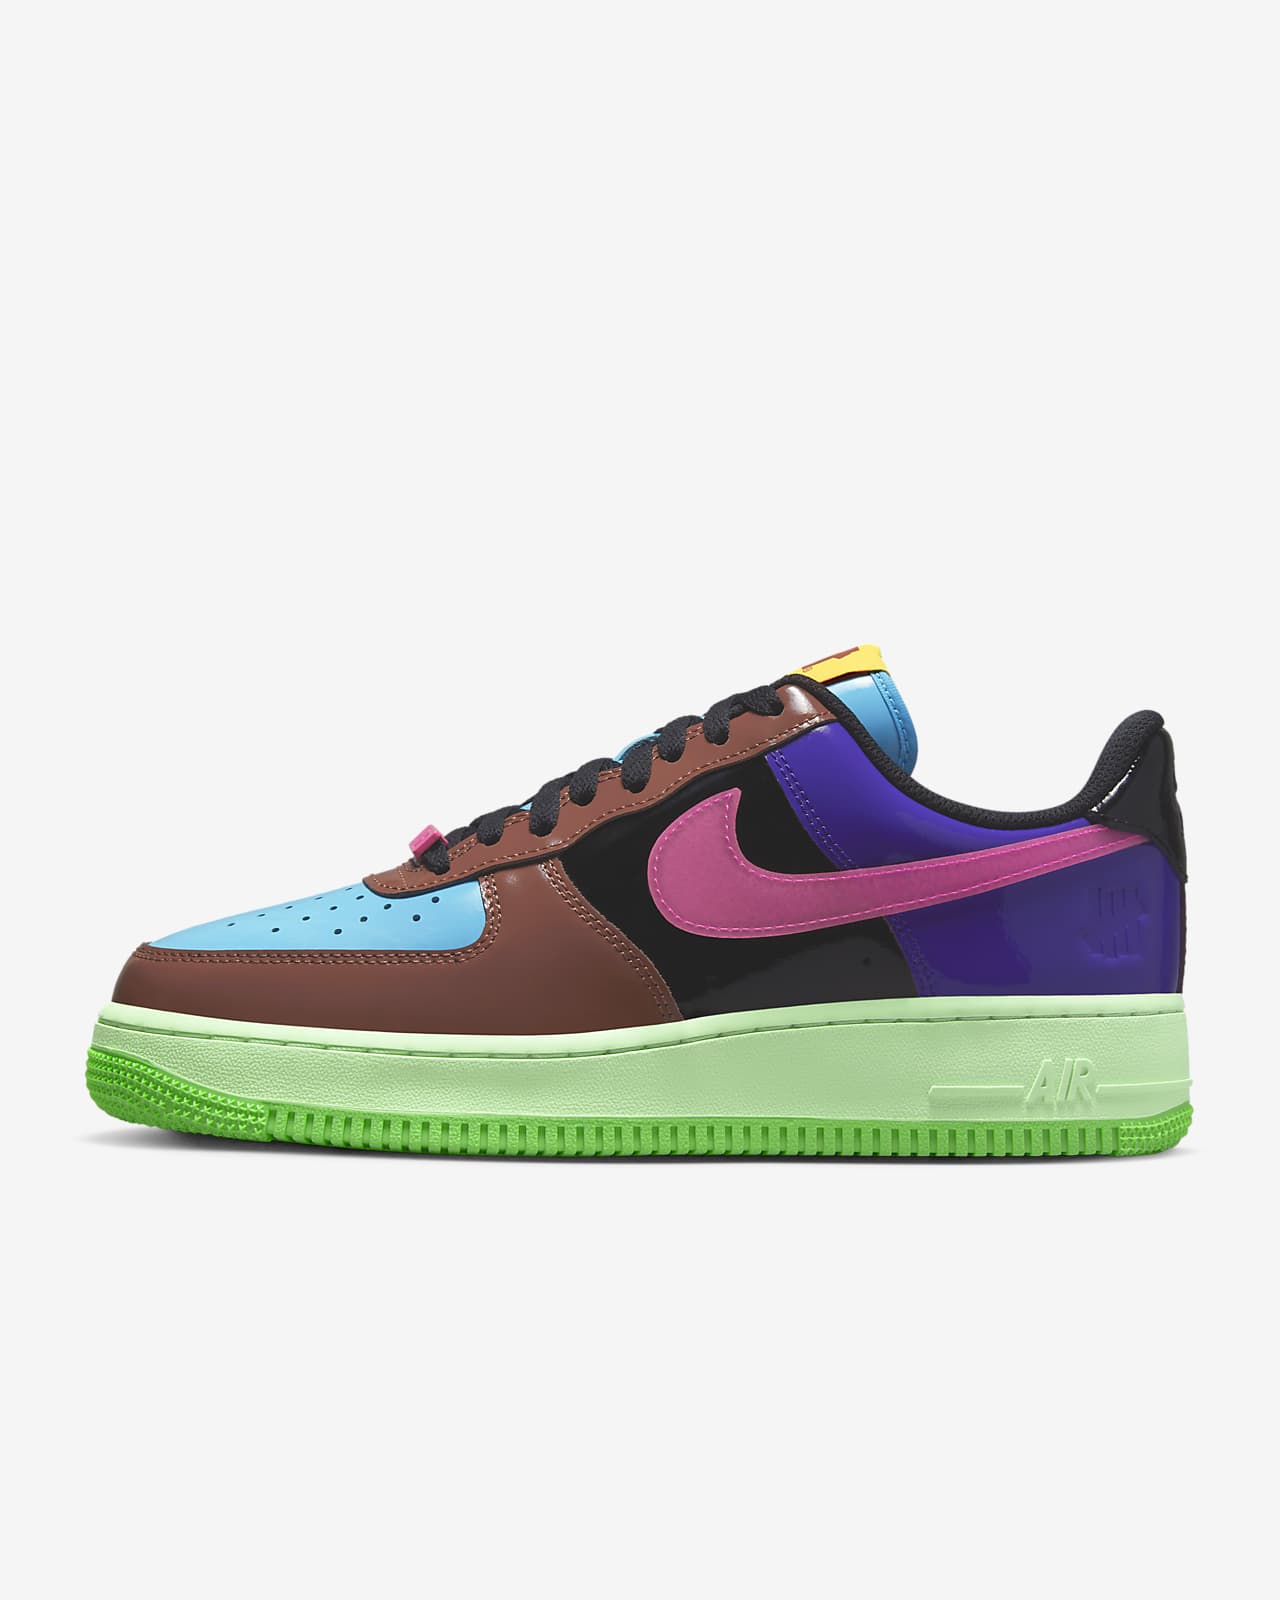 Calzado para hombre Nike Air Force 1 Low x UNDEFEATED.